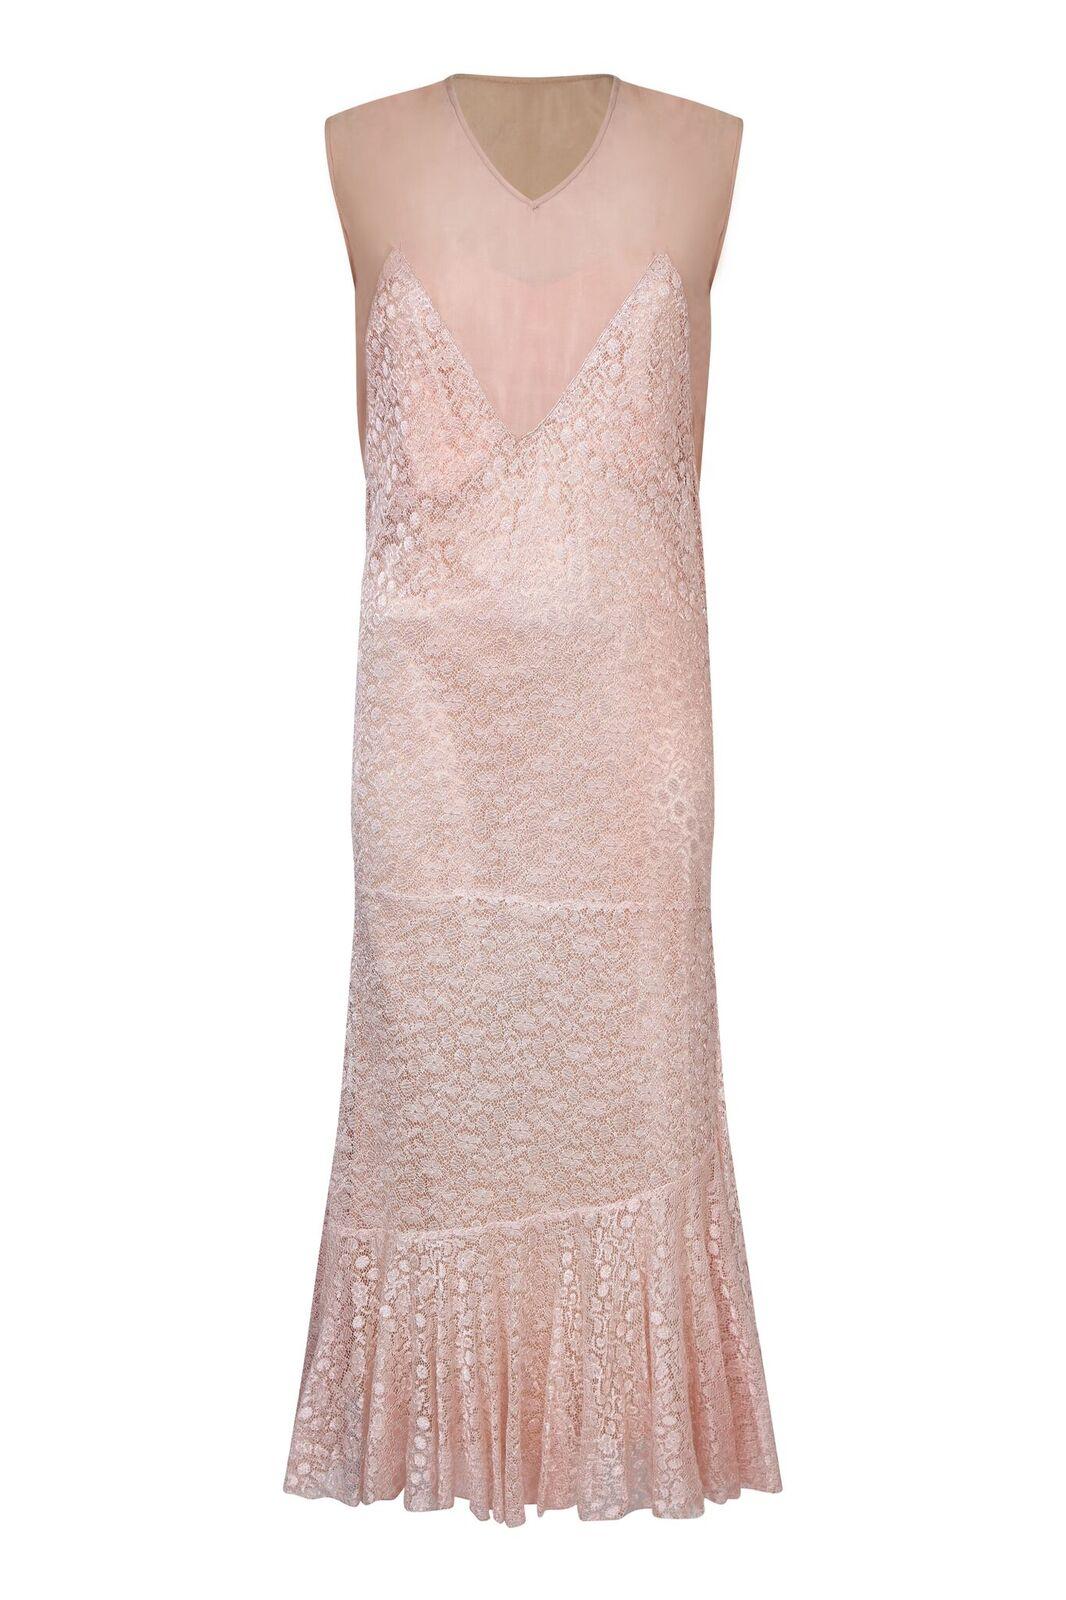 This lovely 1920s satin and lace three piece set is in impeccable vintage condition and could easily be worn by a vintage bride. The set is comprised of a luxurious silky satin slip in warm pink/peach, with a shift style overlay dress almost